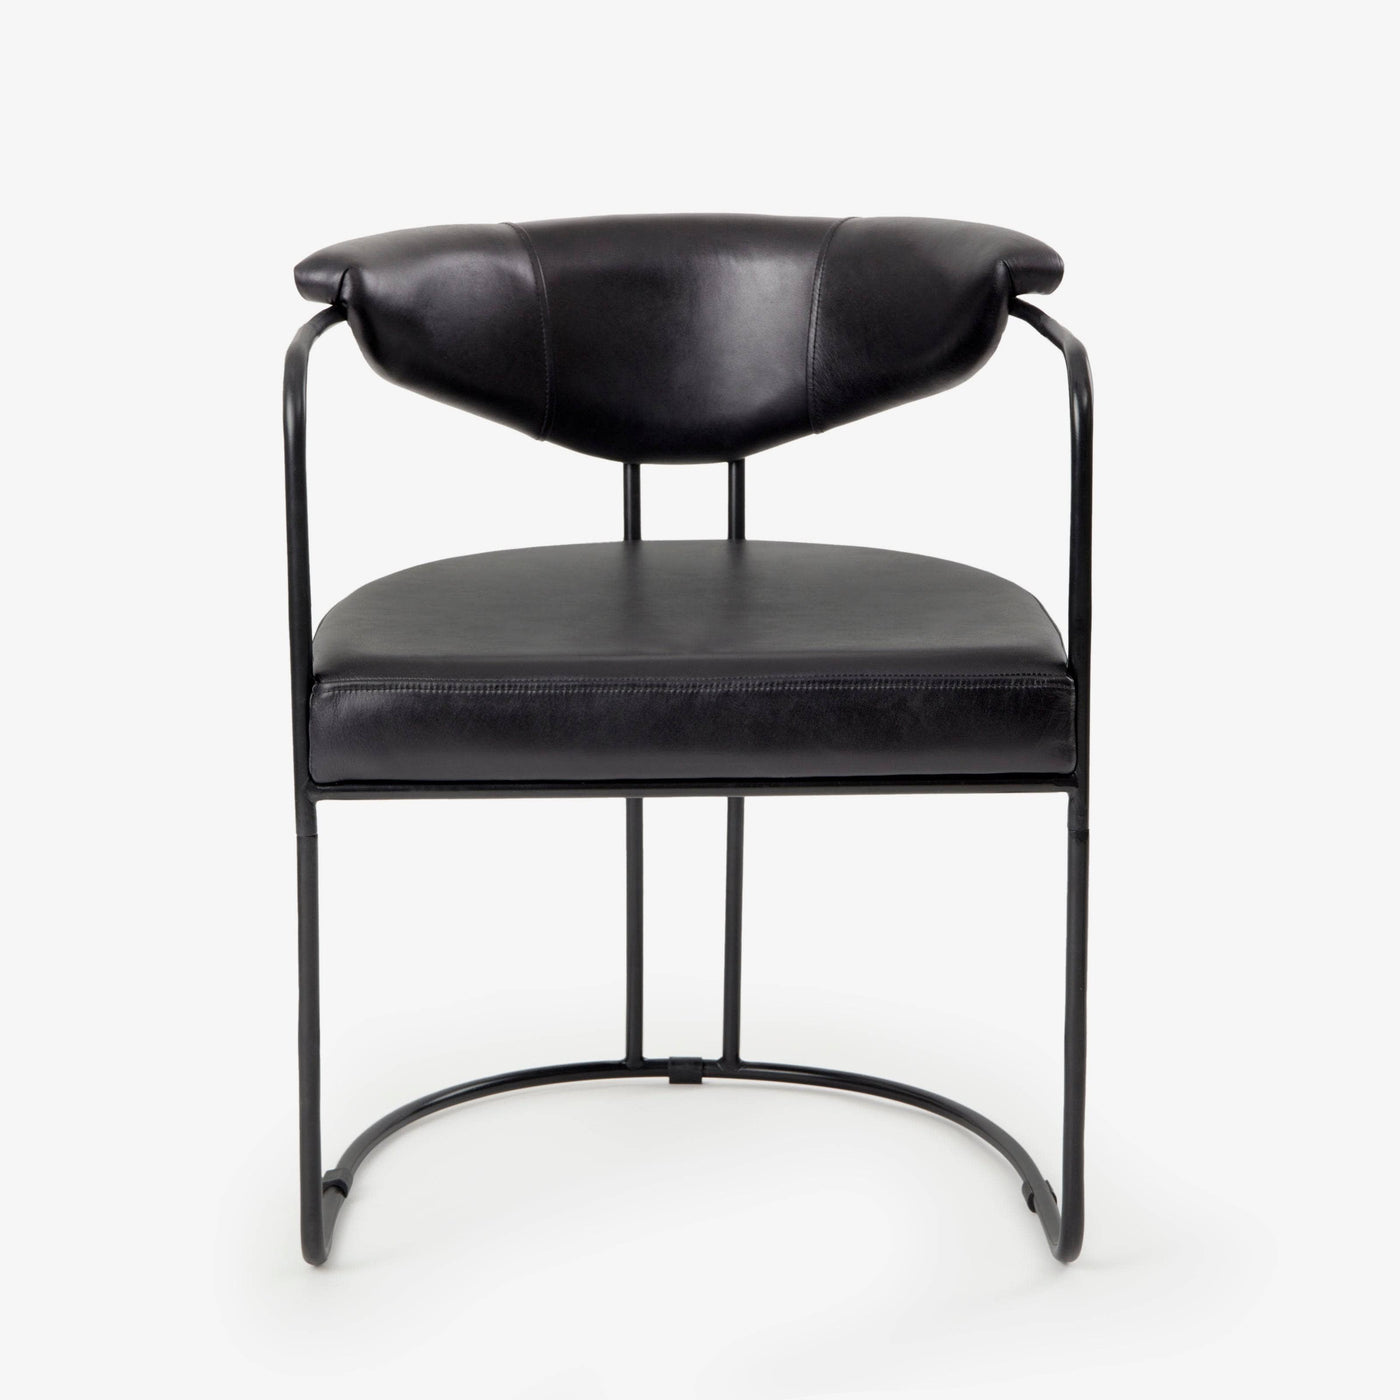 Itari Leather Armchair, Black Dining Chairs & Benches sazy.com